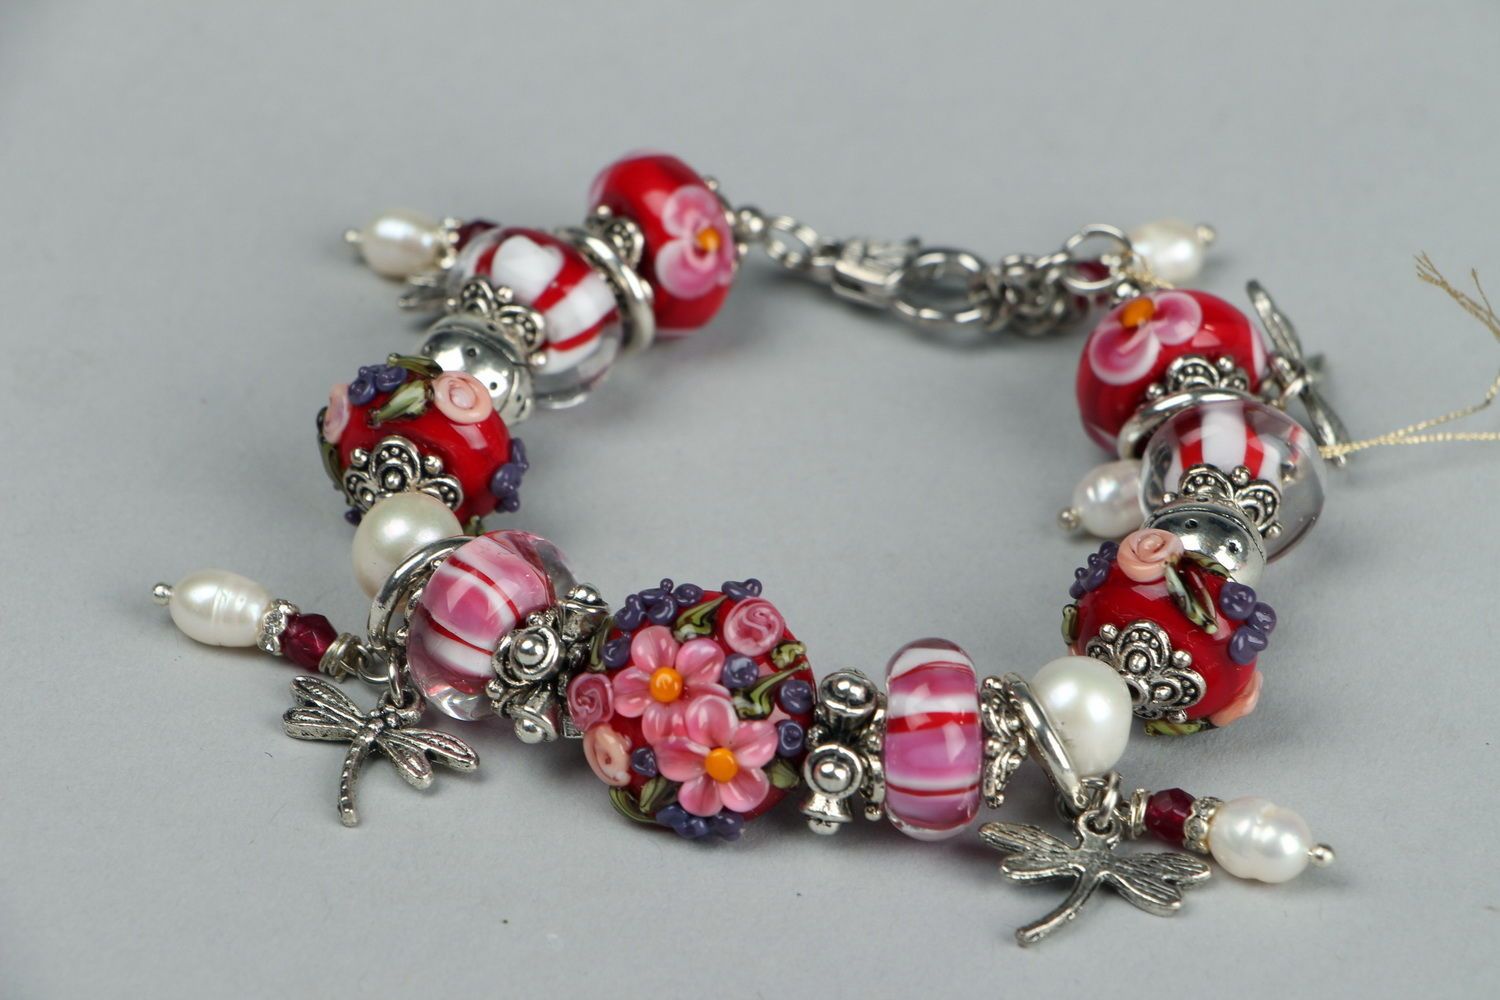 Bracelet made of decorative glass August photo 3